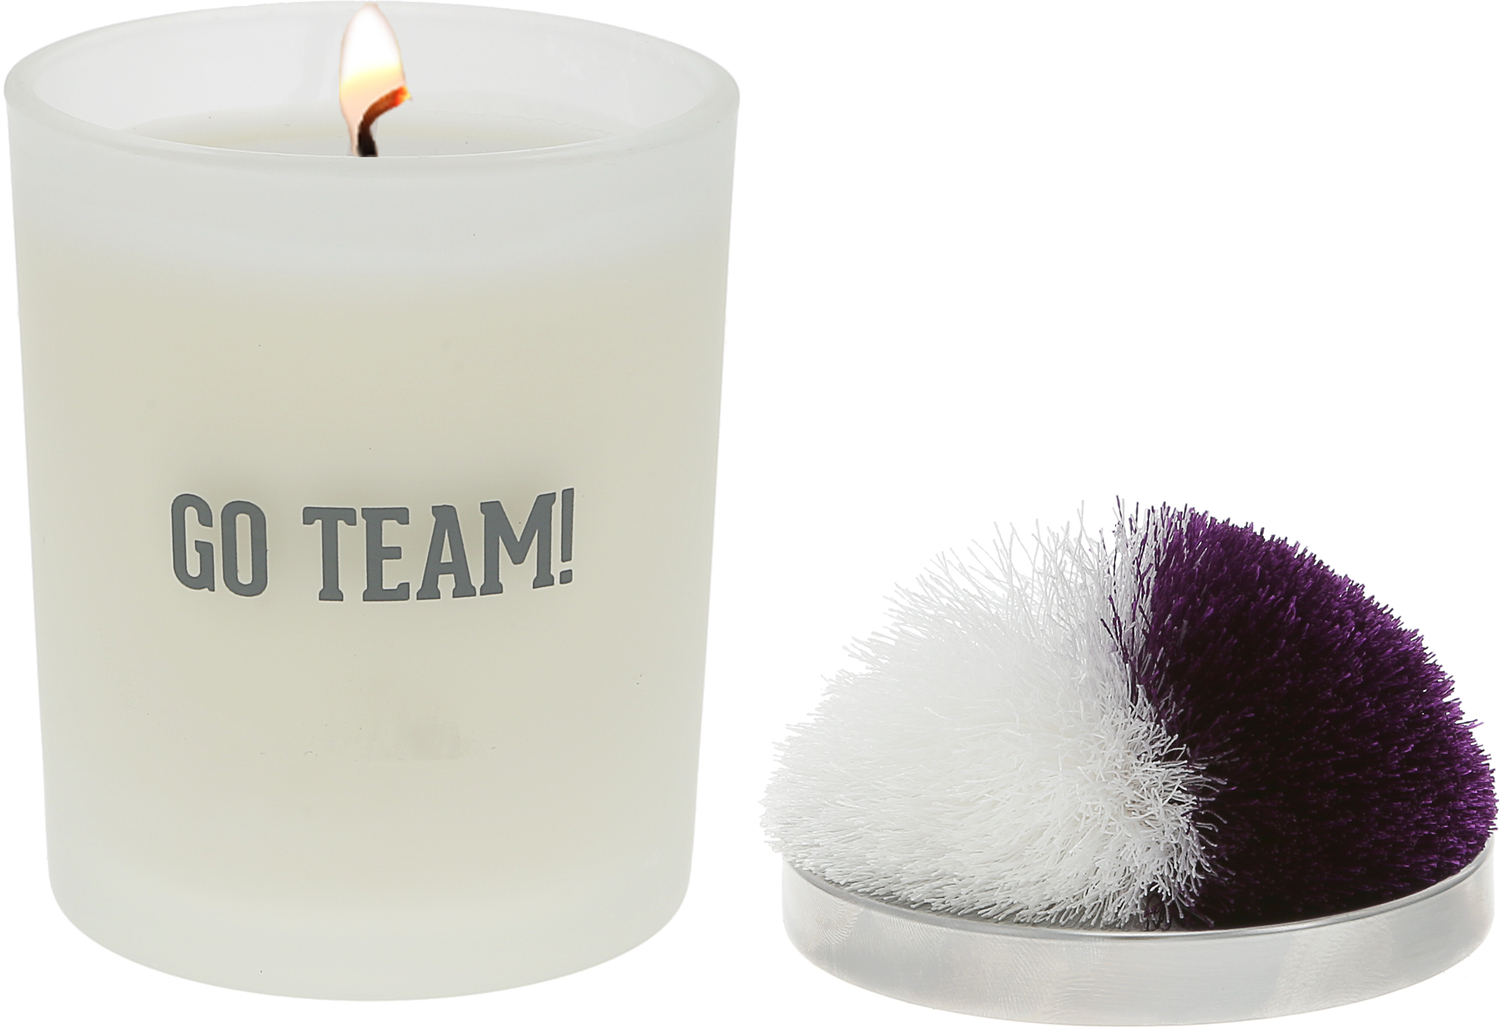 Go Team! - Purple & White by Repre-Scent - Go Team! - Purple & White - 5.5 oz - 100% Soy Wax Candle with Pom Pom Lid
Scent: Tranquility